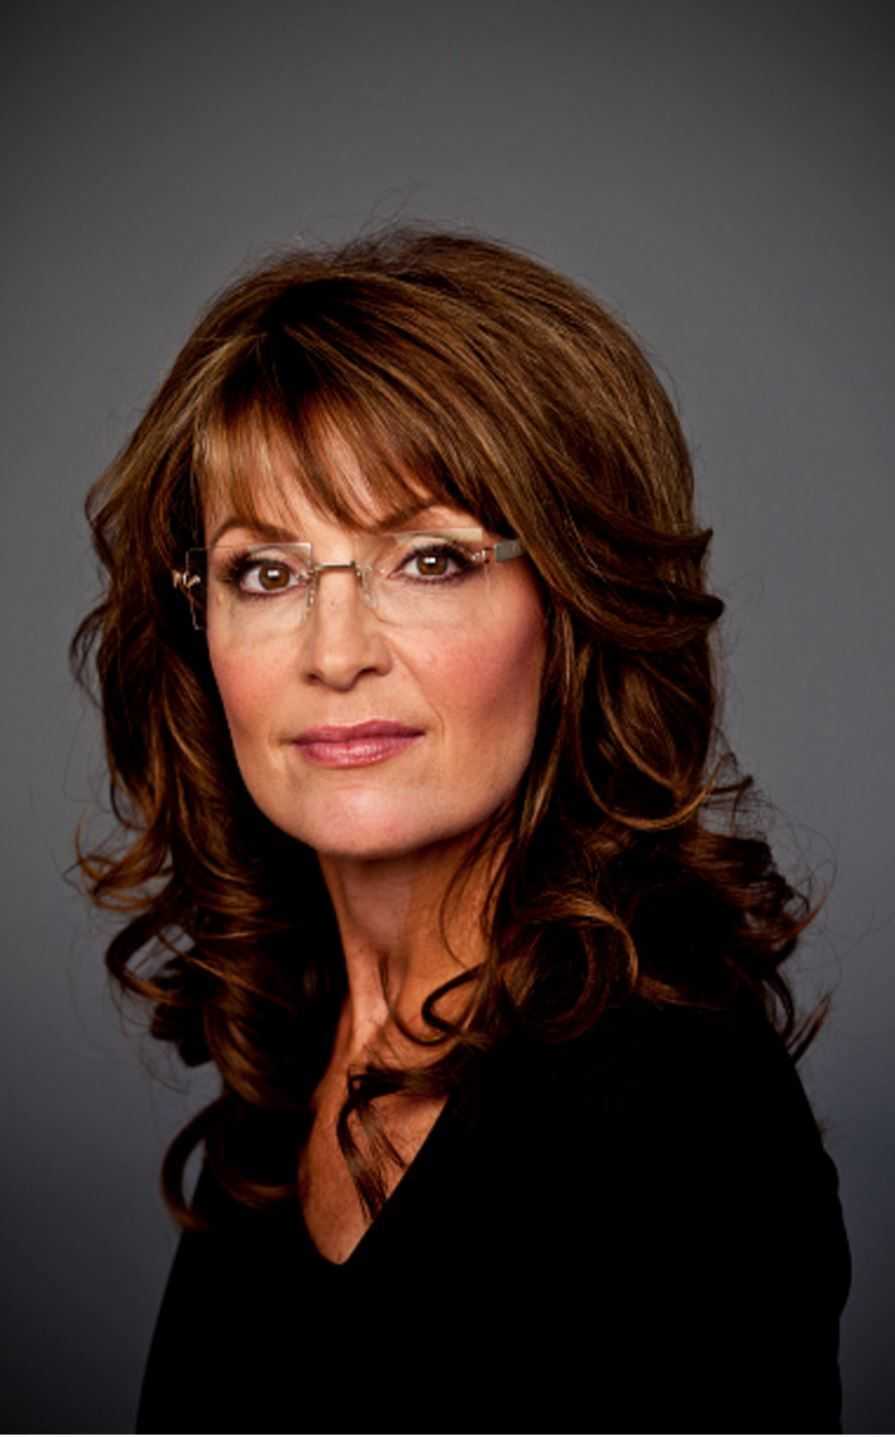 70+ Hot Pictures Of Sarah Palin Are Sexy As Hell 299